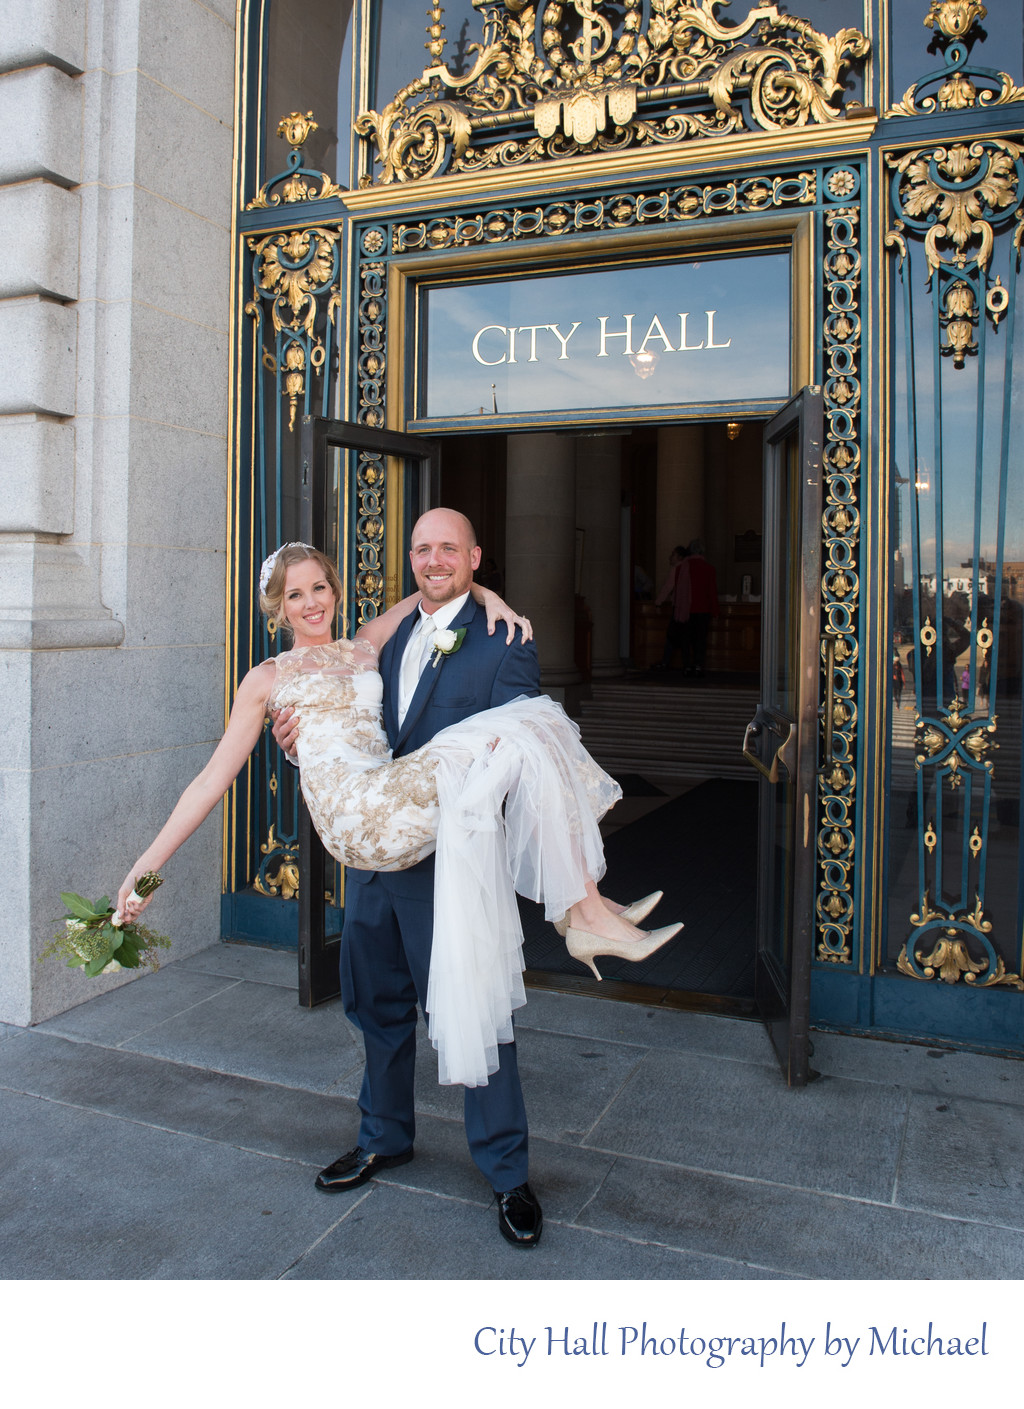 Just Married Bride Carried out of City Hall by Groom